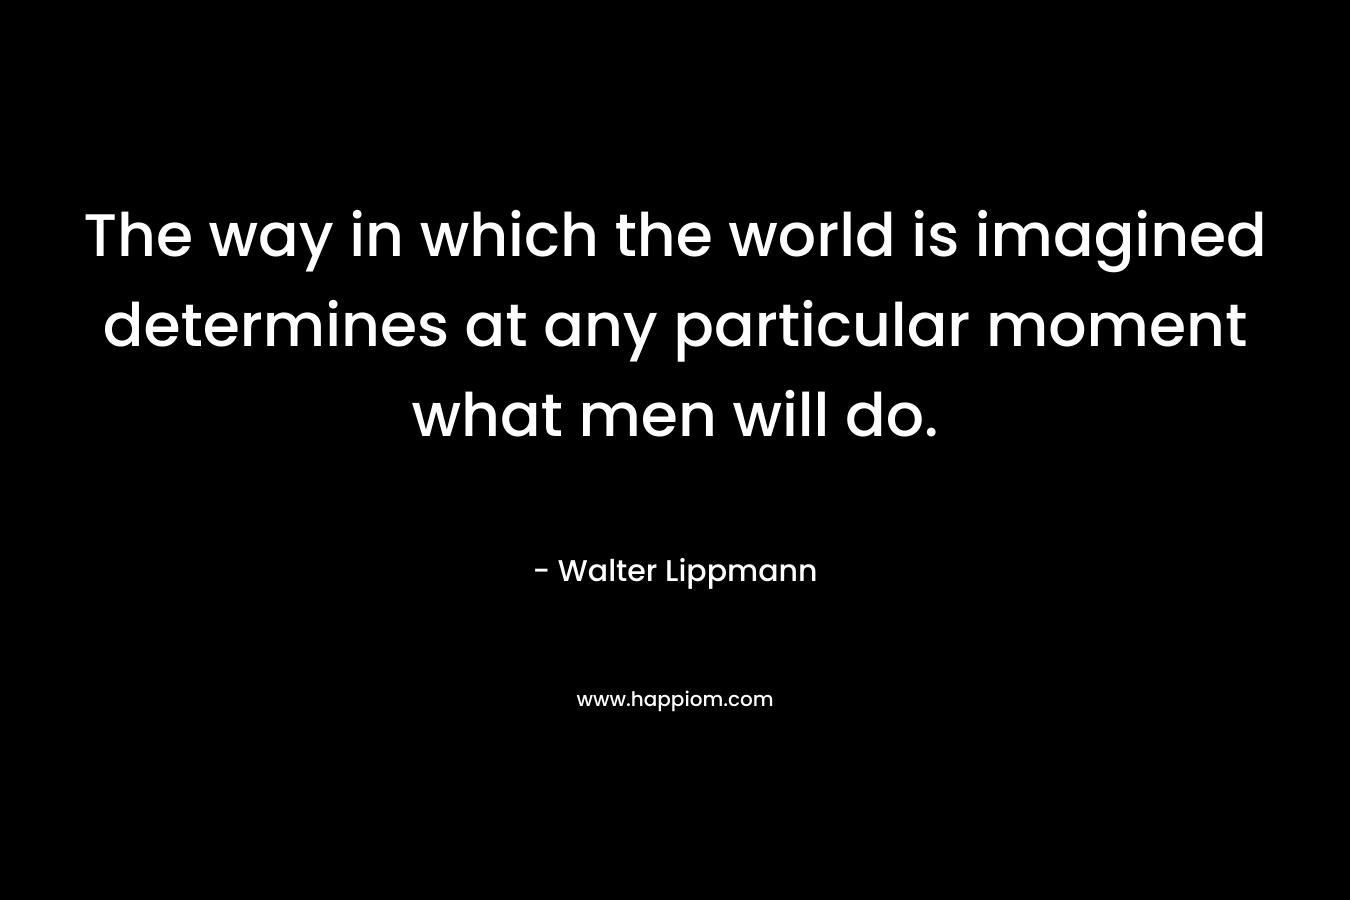 The way in which the world is imagined determines at any particular moment what men will do.